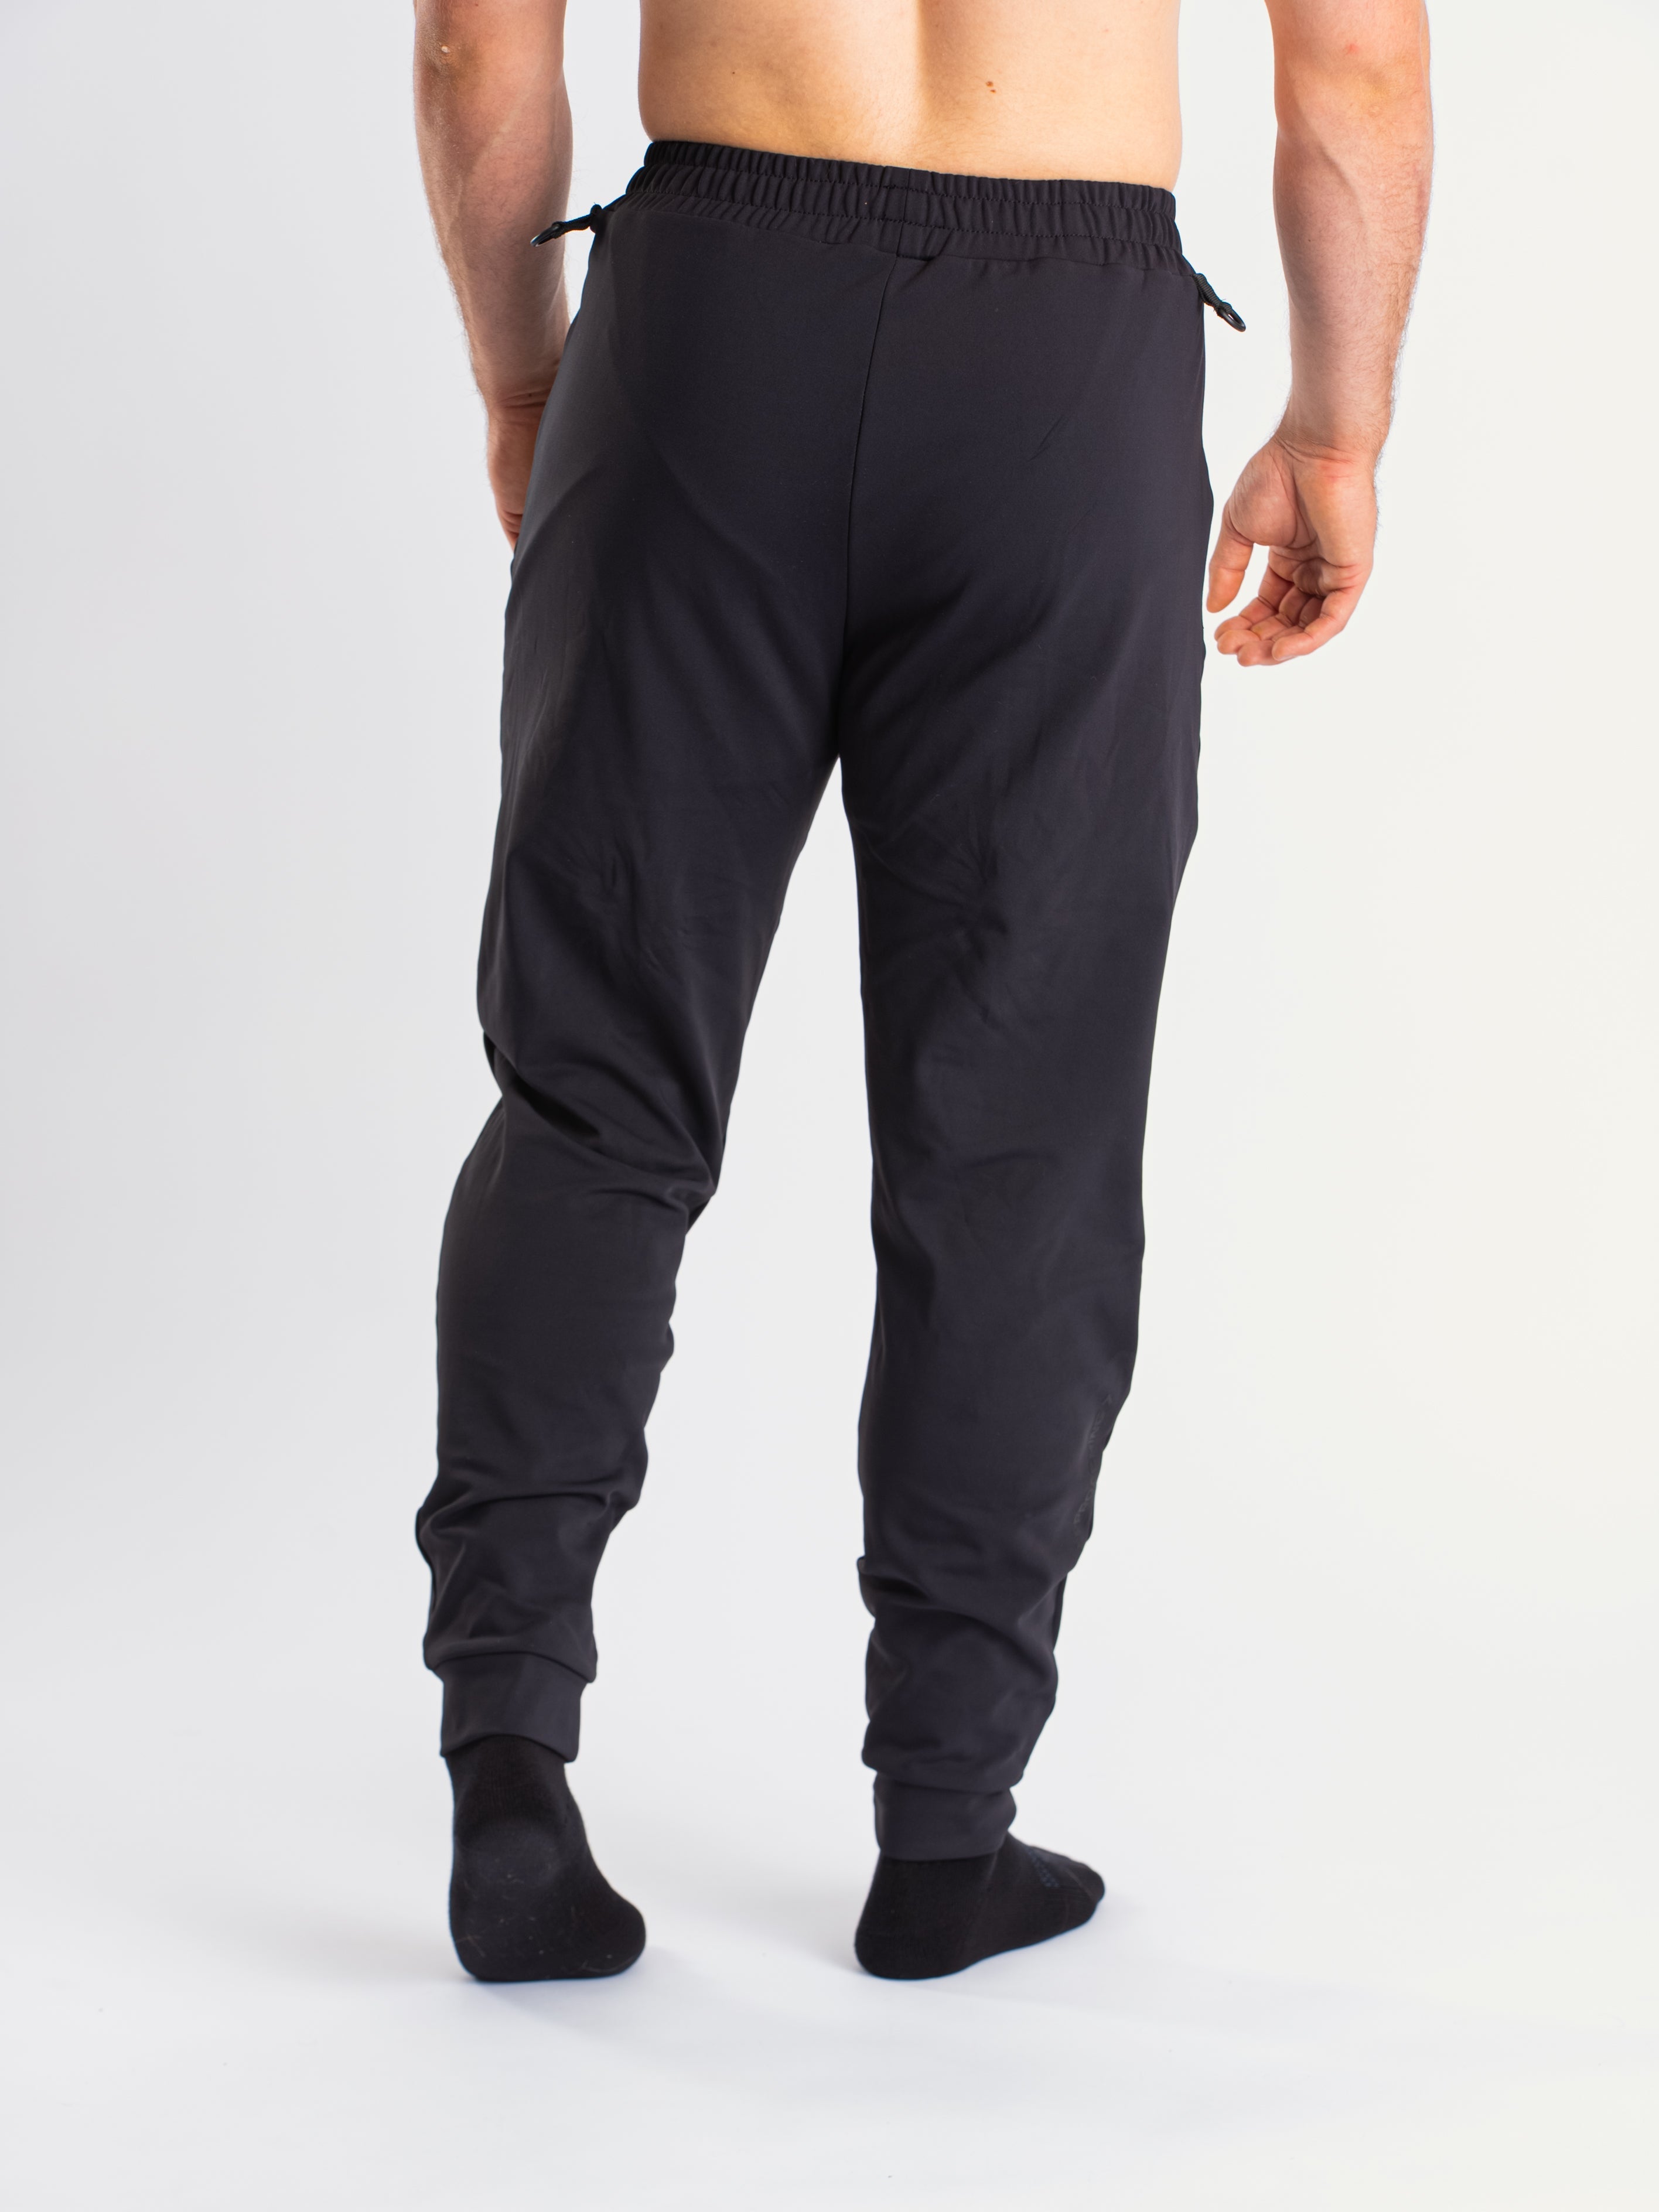 The Cobra 360Go 1Z Joggers, are designed for ultimate comfort and flexibility. Made with 360-degree stretch fabric, these joggers provide complete freedom of movement, perfect for strength training, and everyday wear. The built-in super-soft performance liner adds an extra layer of comfort, while the soft fleece inner feel ensures warmth and coziness. Designed with a unisex fit, it pairs perfectly with our matching Cobra Quarter Zip Jacket. All A7 ships to UK, Norway, Switzerland and Iceland.